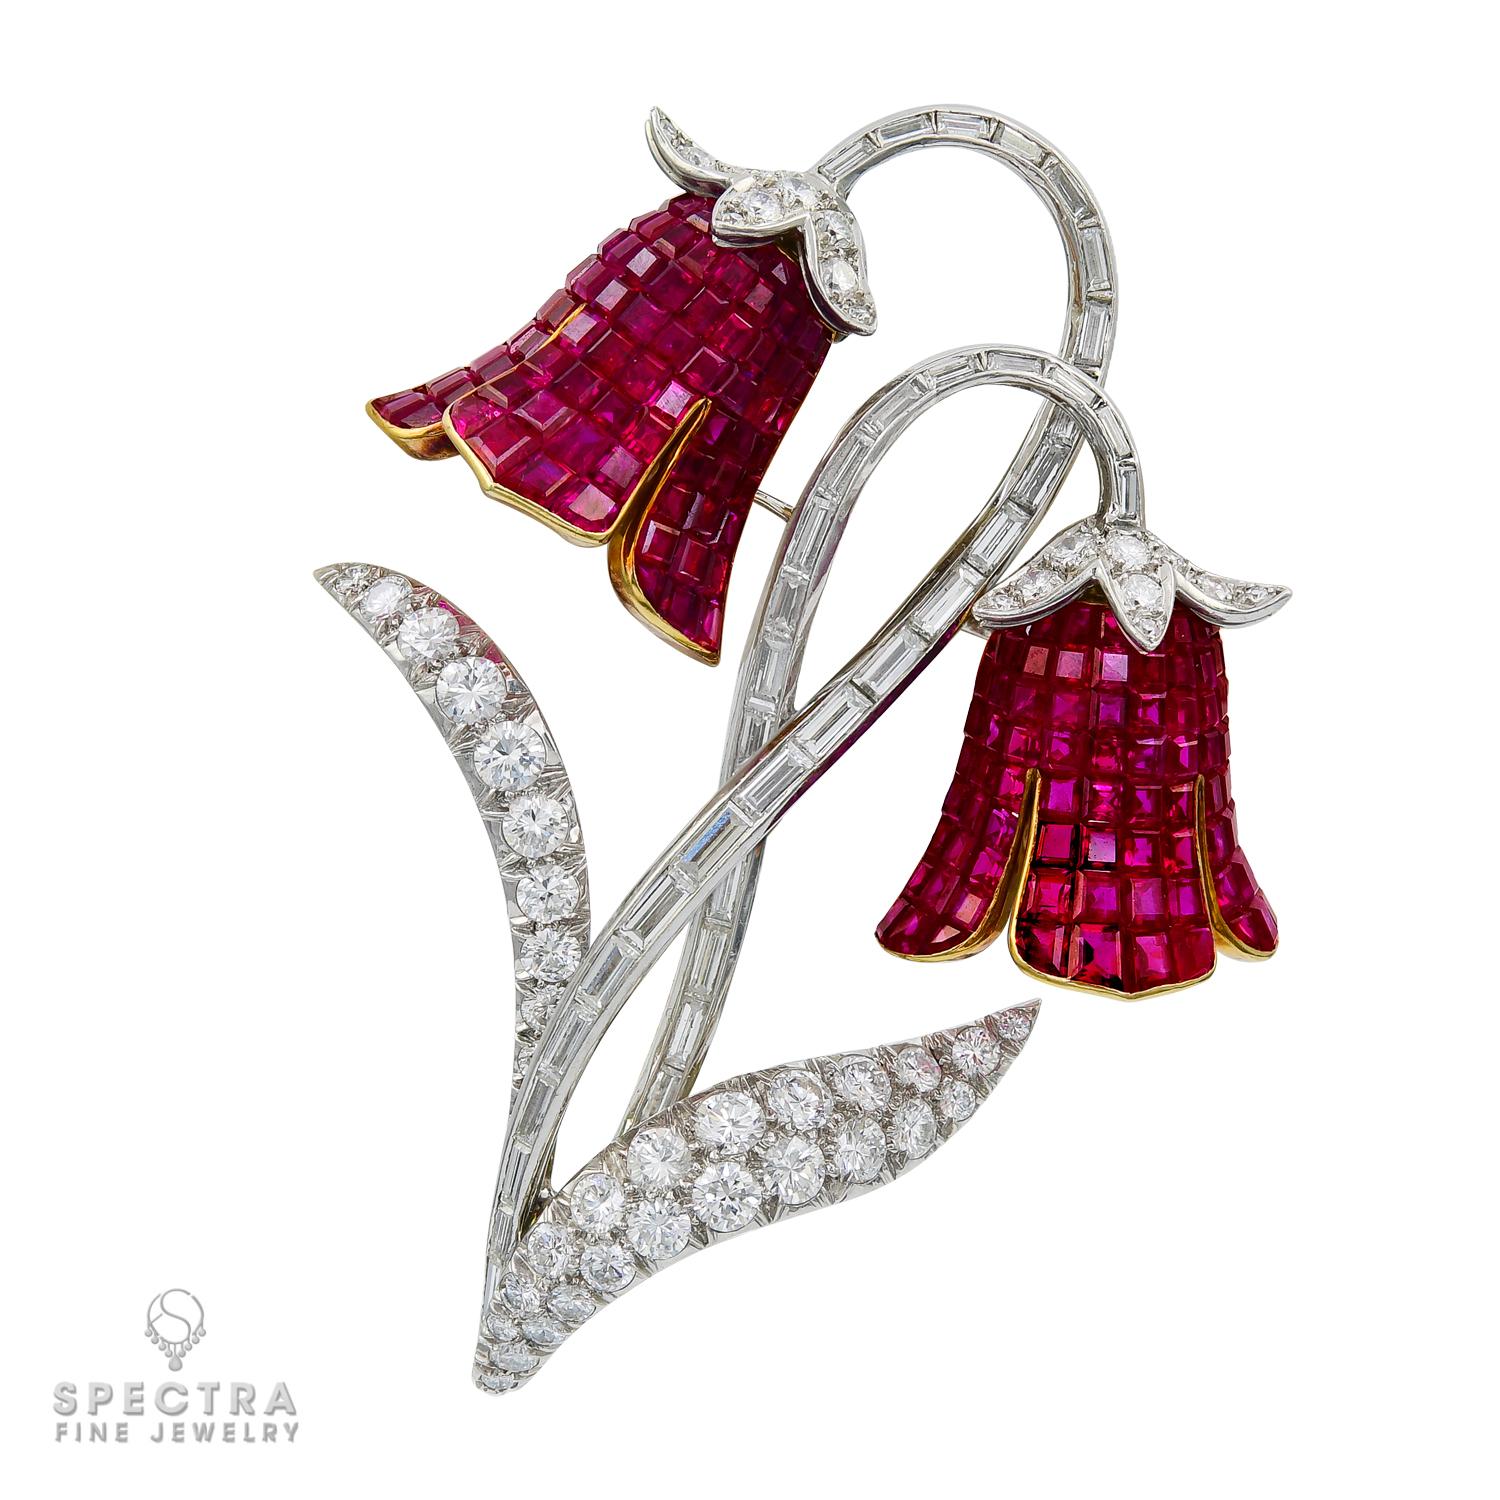 A pair of two elegant brooches featuring mystery-set sapphires, rubies and round and baguette diamonds.
Metal is platinum & 18k yellow gold, total gross weight is 67.66 gr.

Sapphire brooch is featuring:
34 baguette diamonds weighing approximately